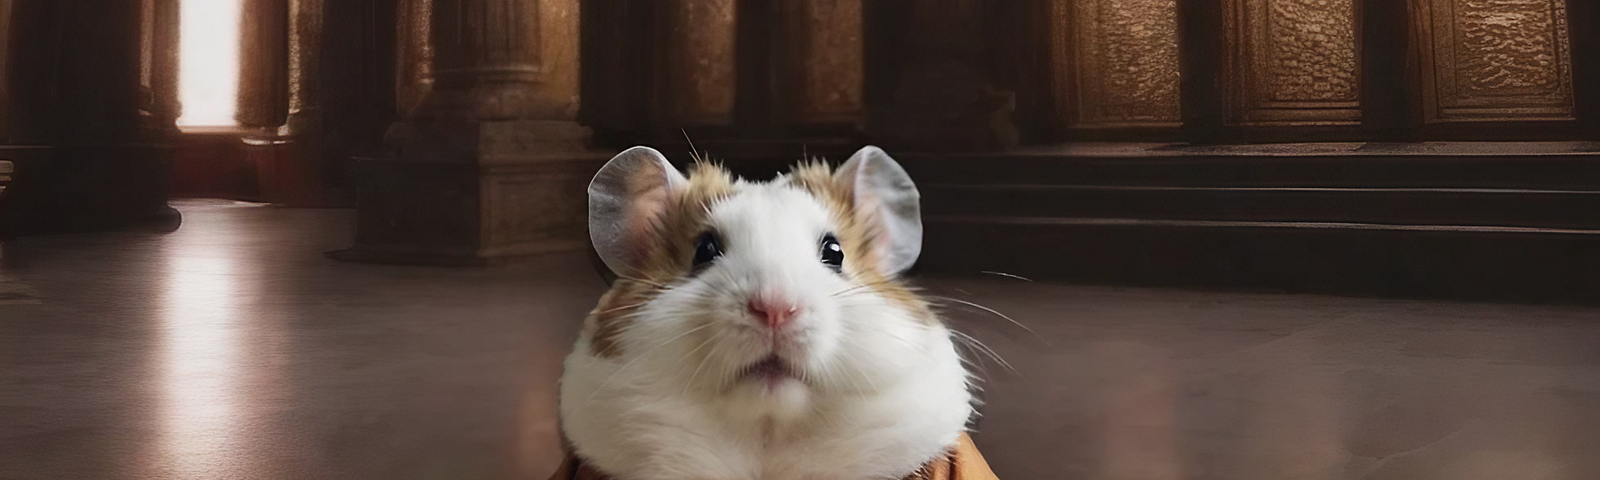 A hamster wearing a robe, about to climb onto a bed of nails